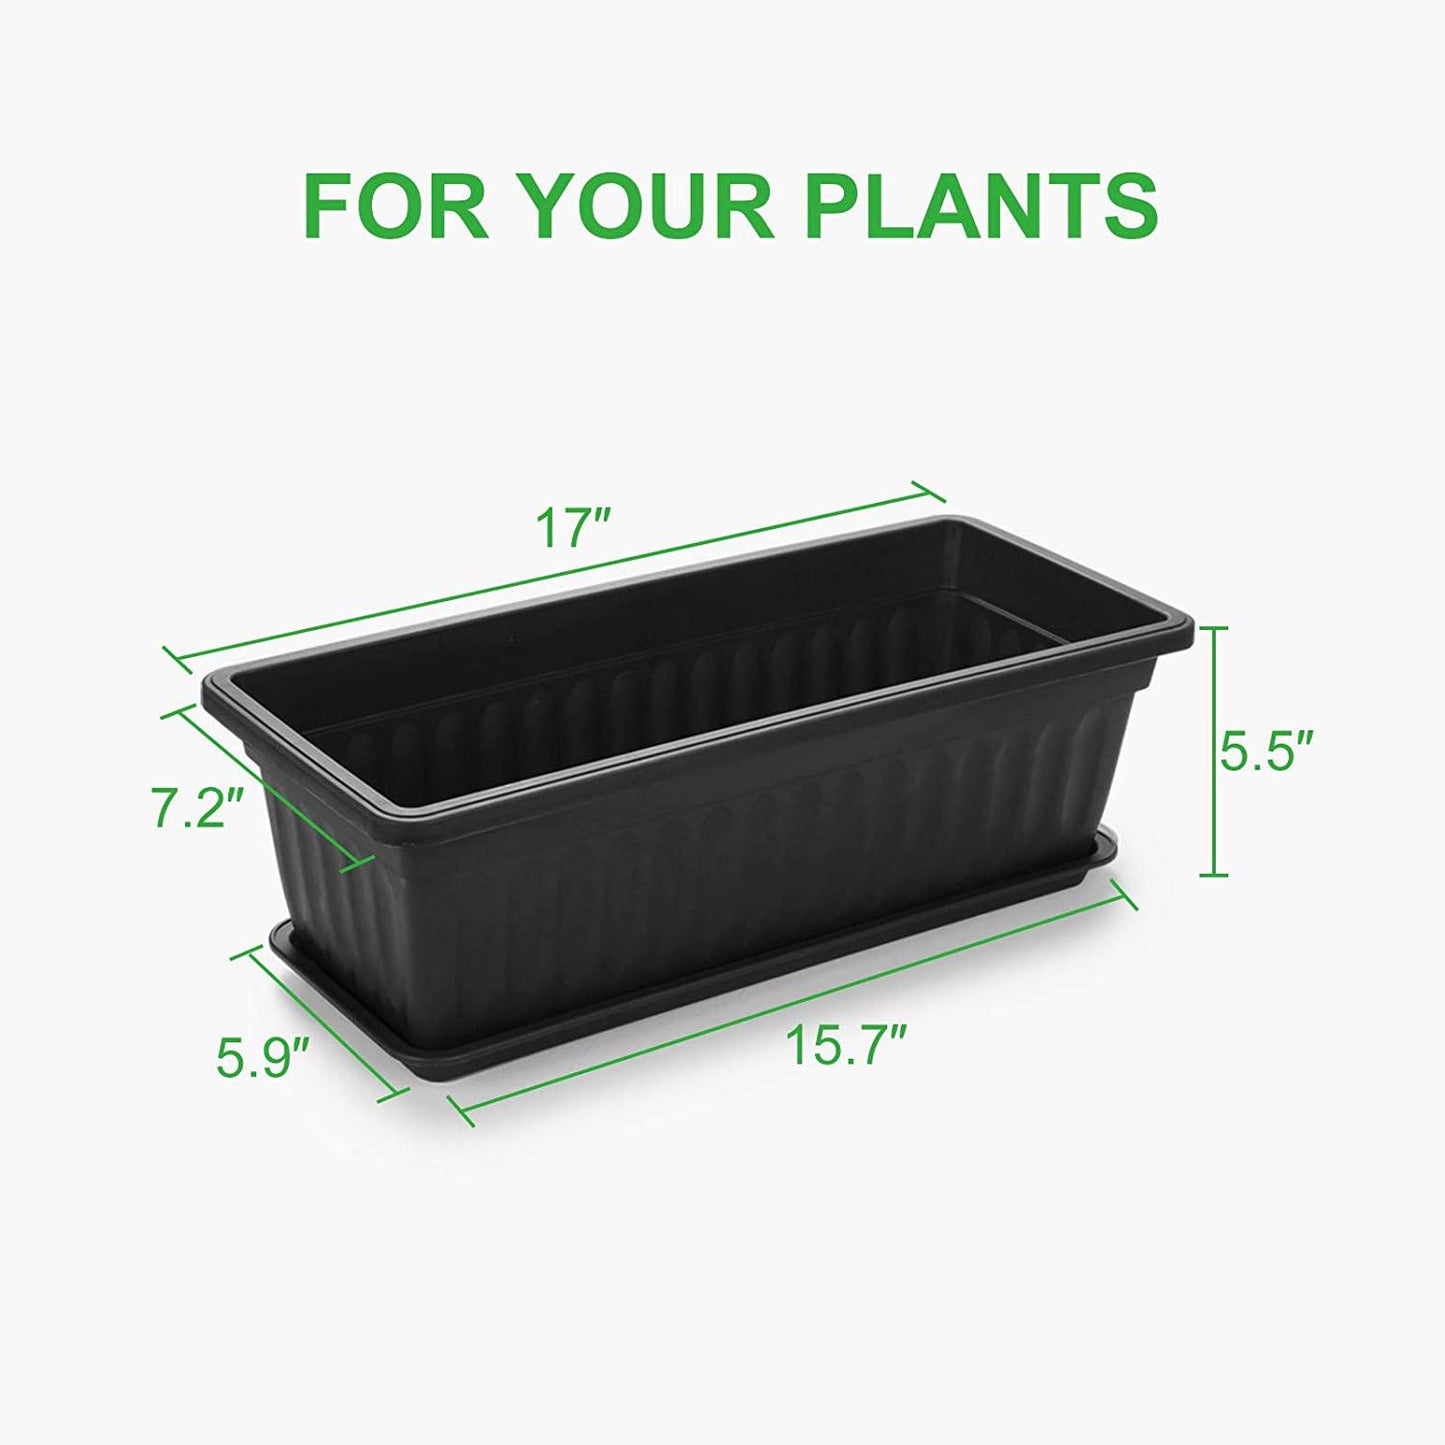 GROWNEER 6 Packs 17 Inches Black Flower Window Box Plastic Vegetable Planters with 15 Pcs Plant Labels, for Windowsill, Patio, Garden, Home Décor,